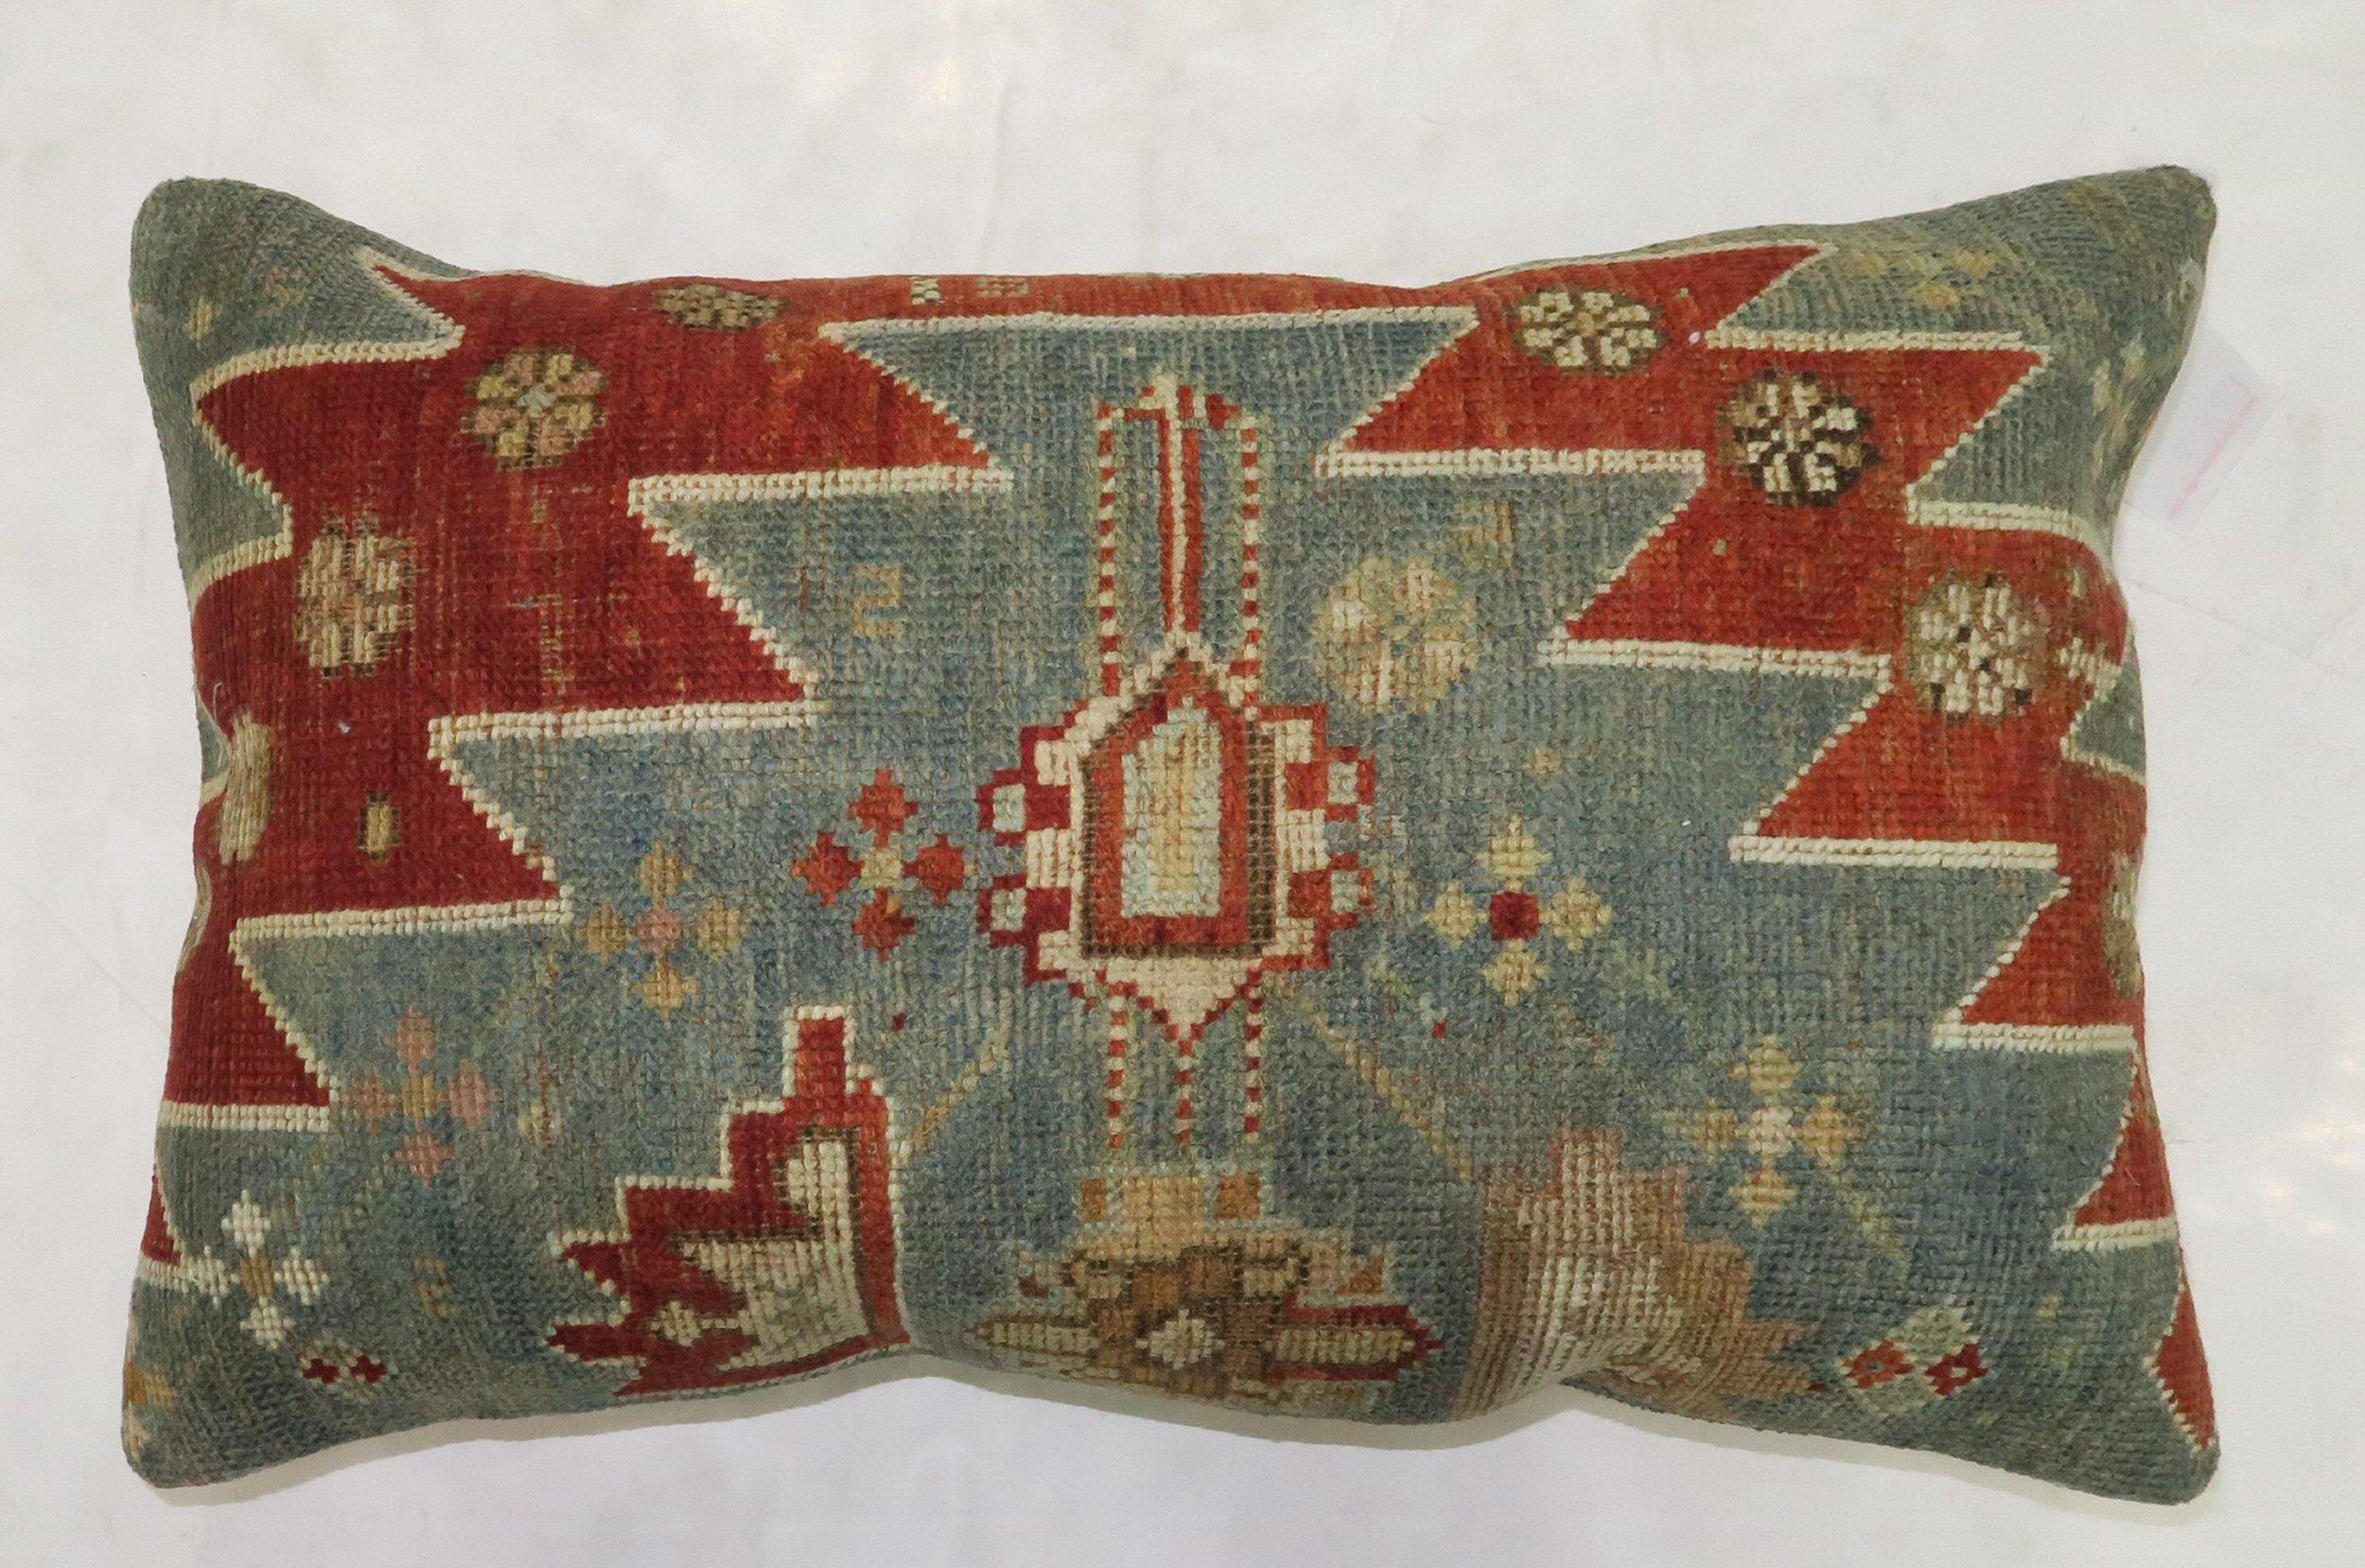 Hand-Knotted Rustic Antique Tribal Caucasian Lumbar Rug Pillow in Red and Soft Blue